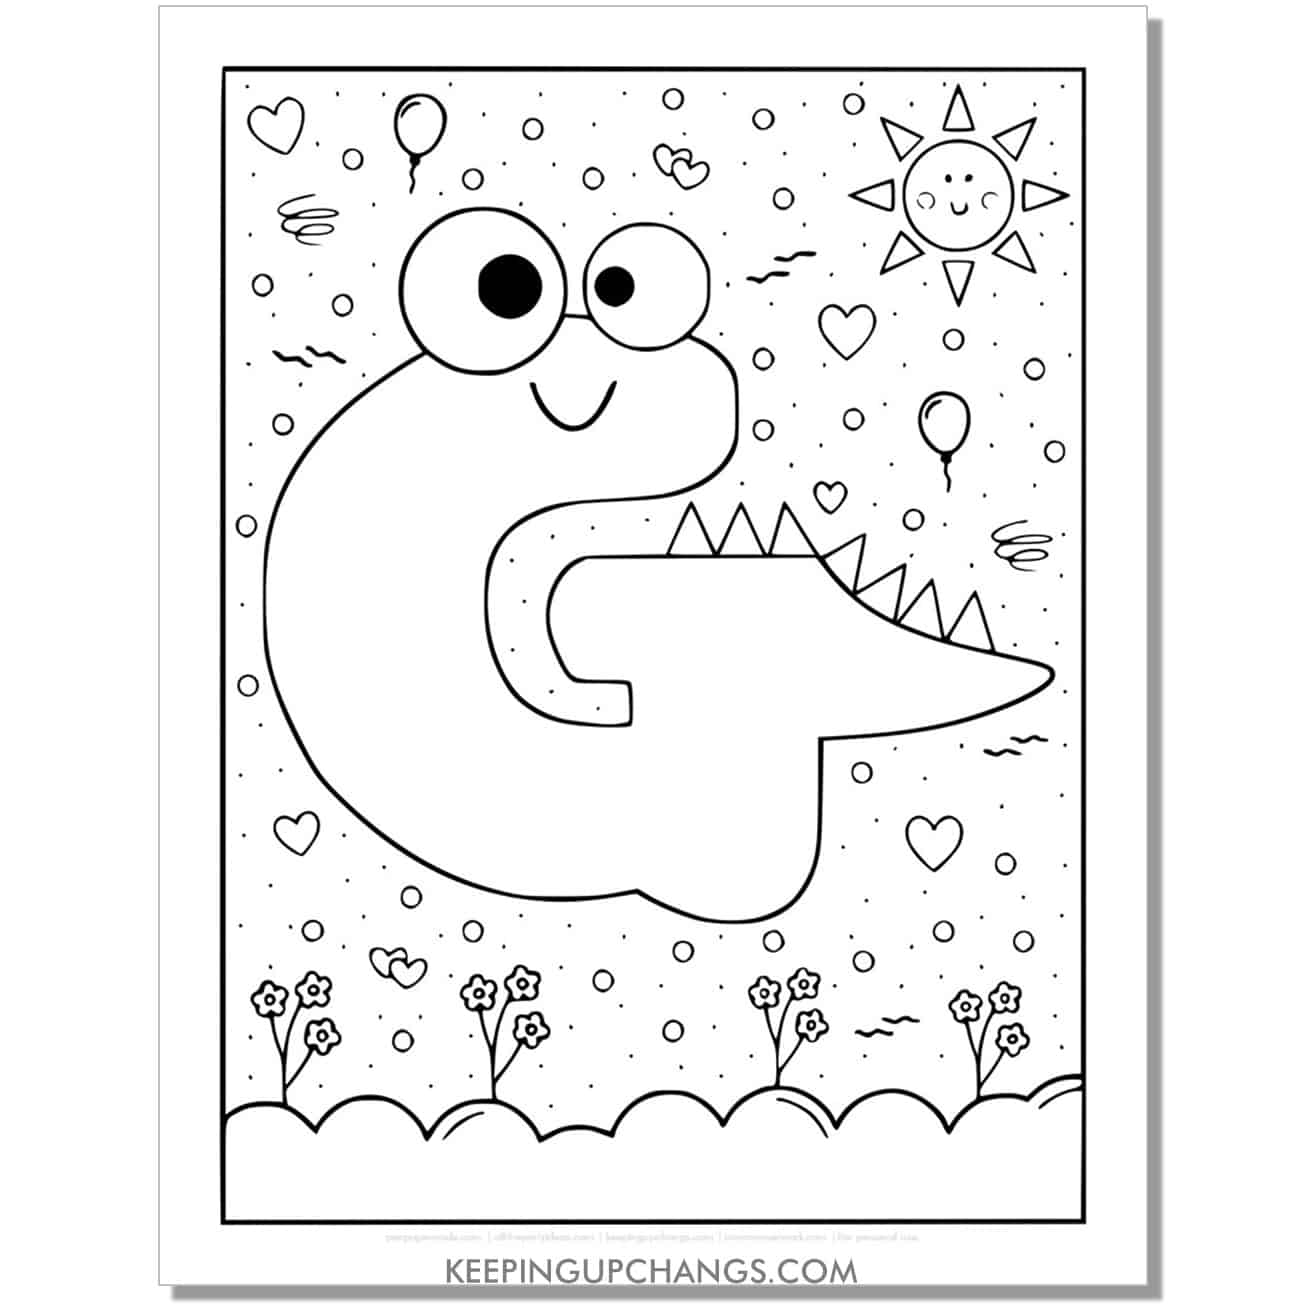 cute g coloring page with monster dinosaur letter.